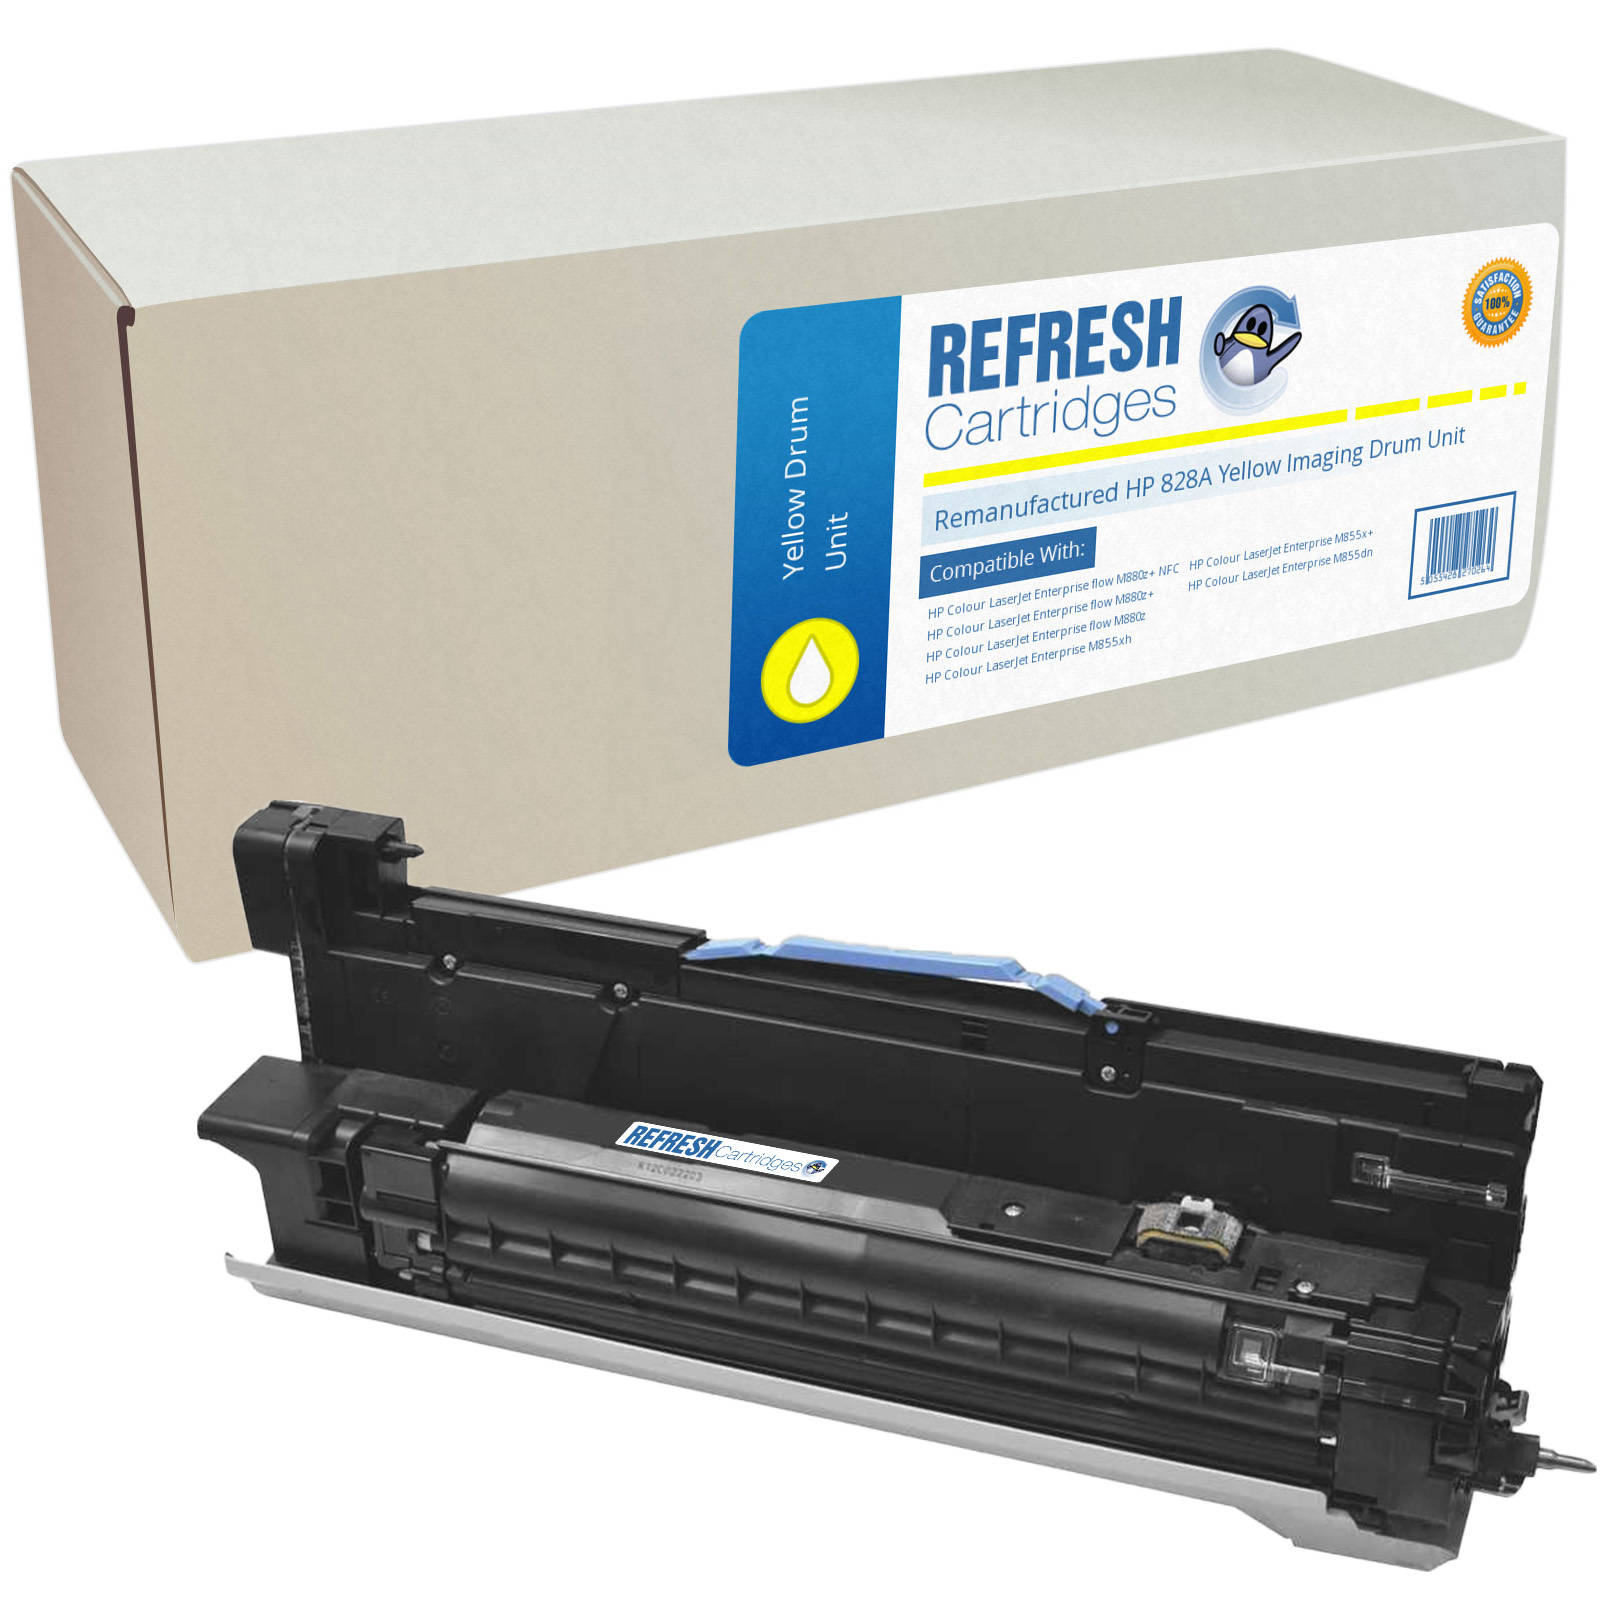 Remanufactured 828A (CF364A) Yellow Imaging Drum Unit Replacement for HP Printers